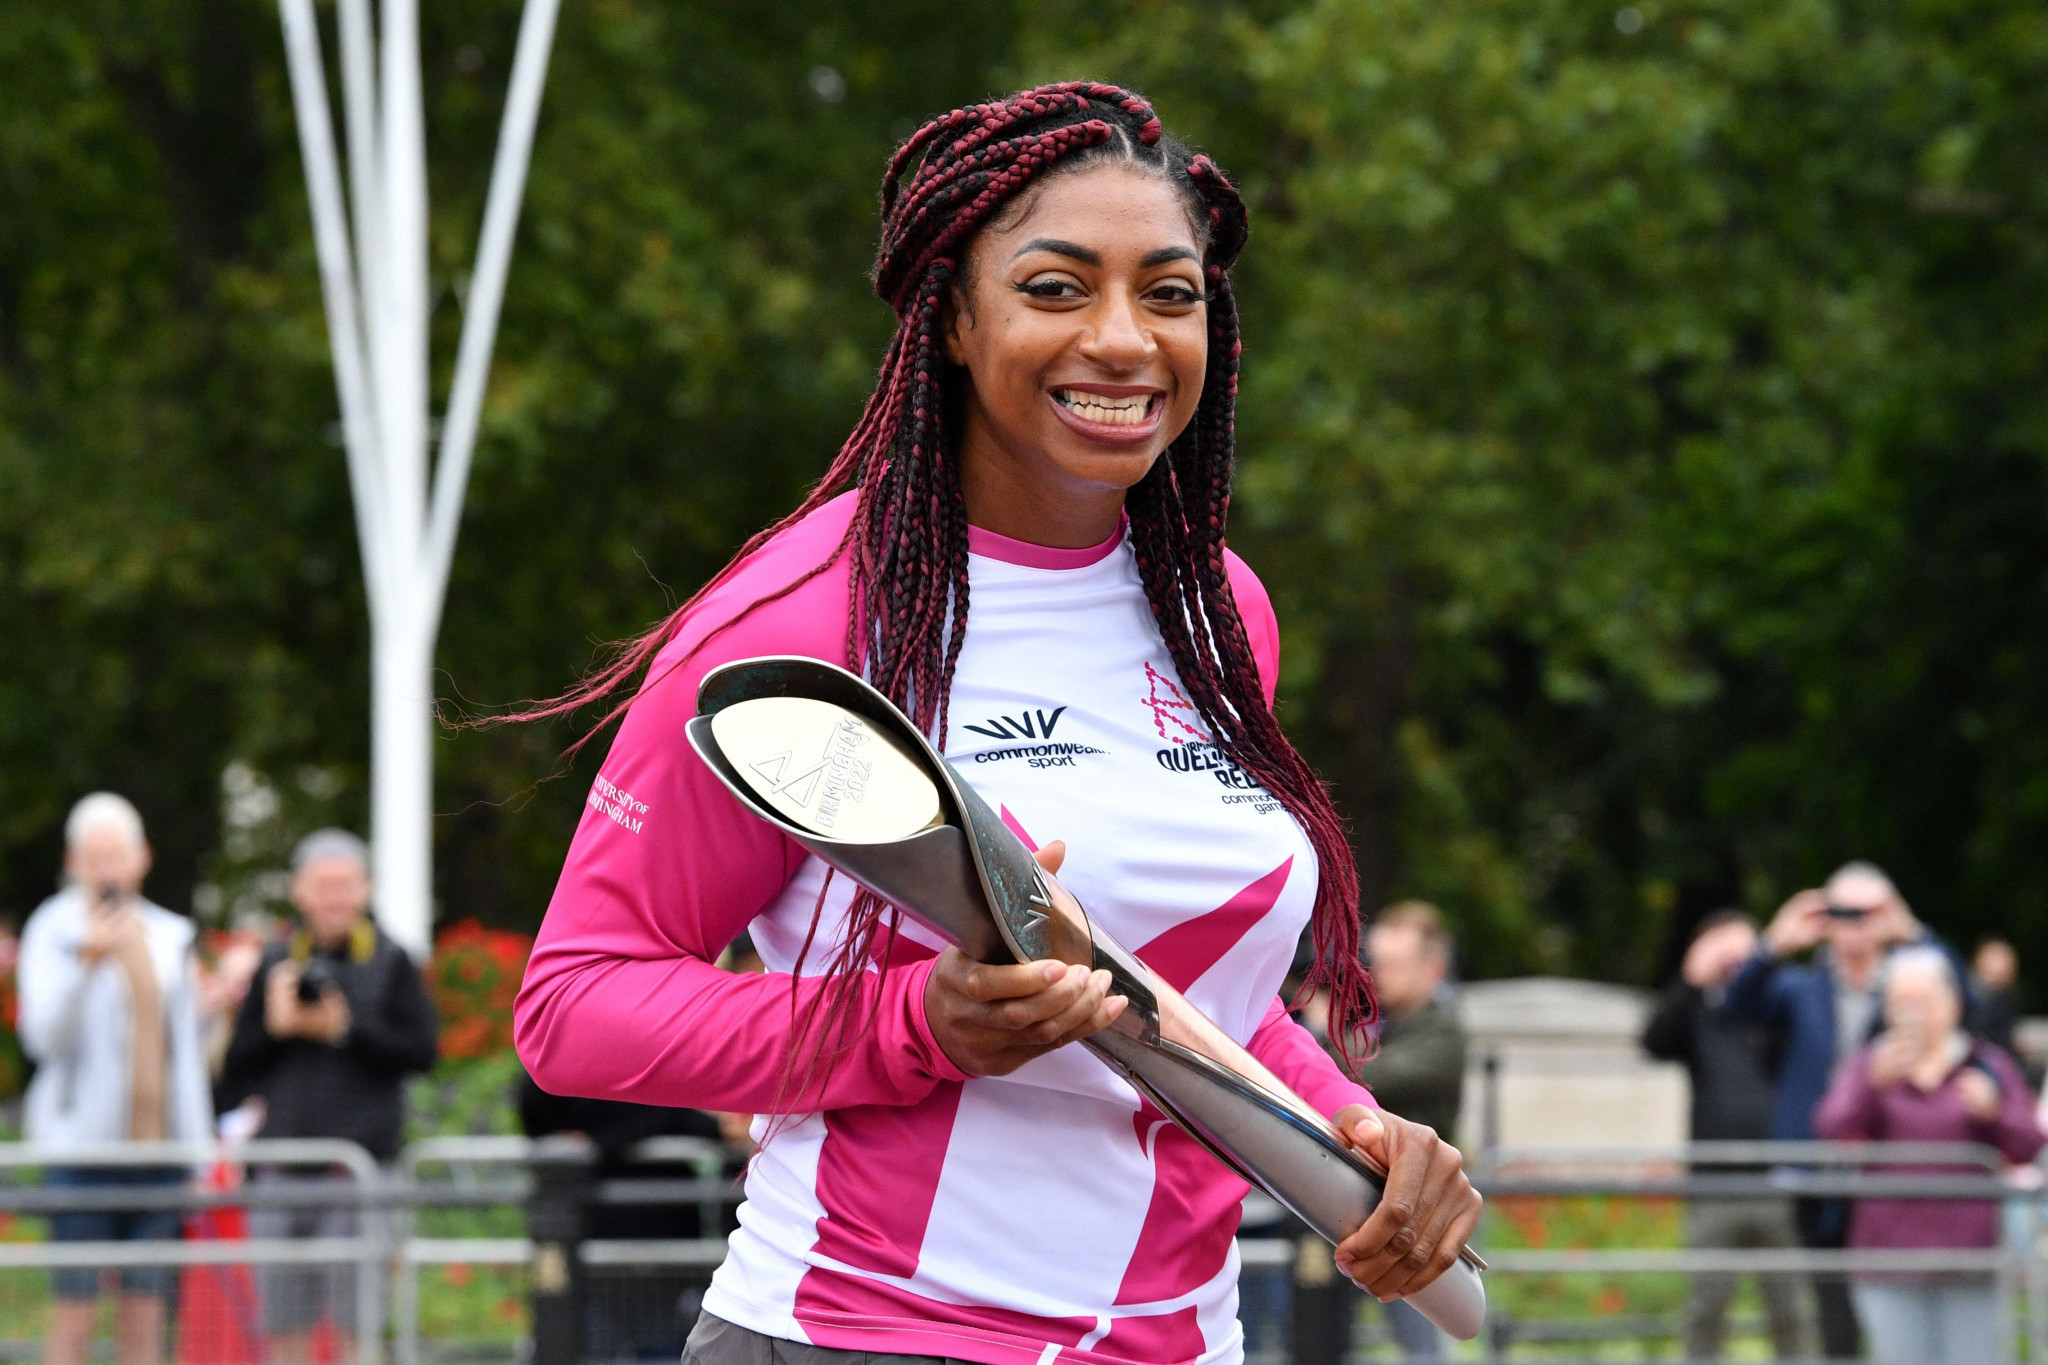 Kadeena Cox was the first person to carry Queen's Baton ©Getty Images